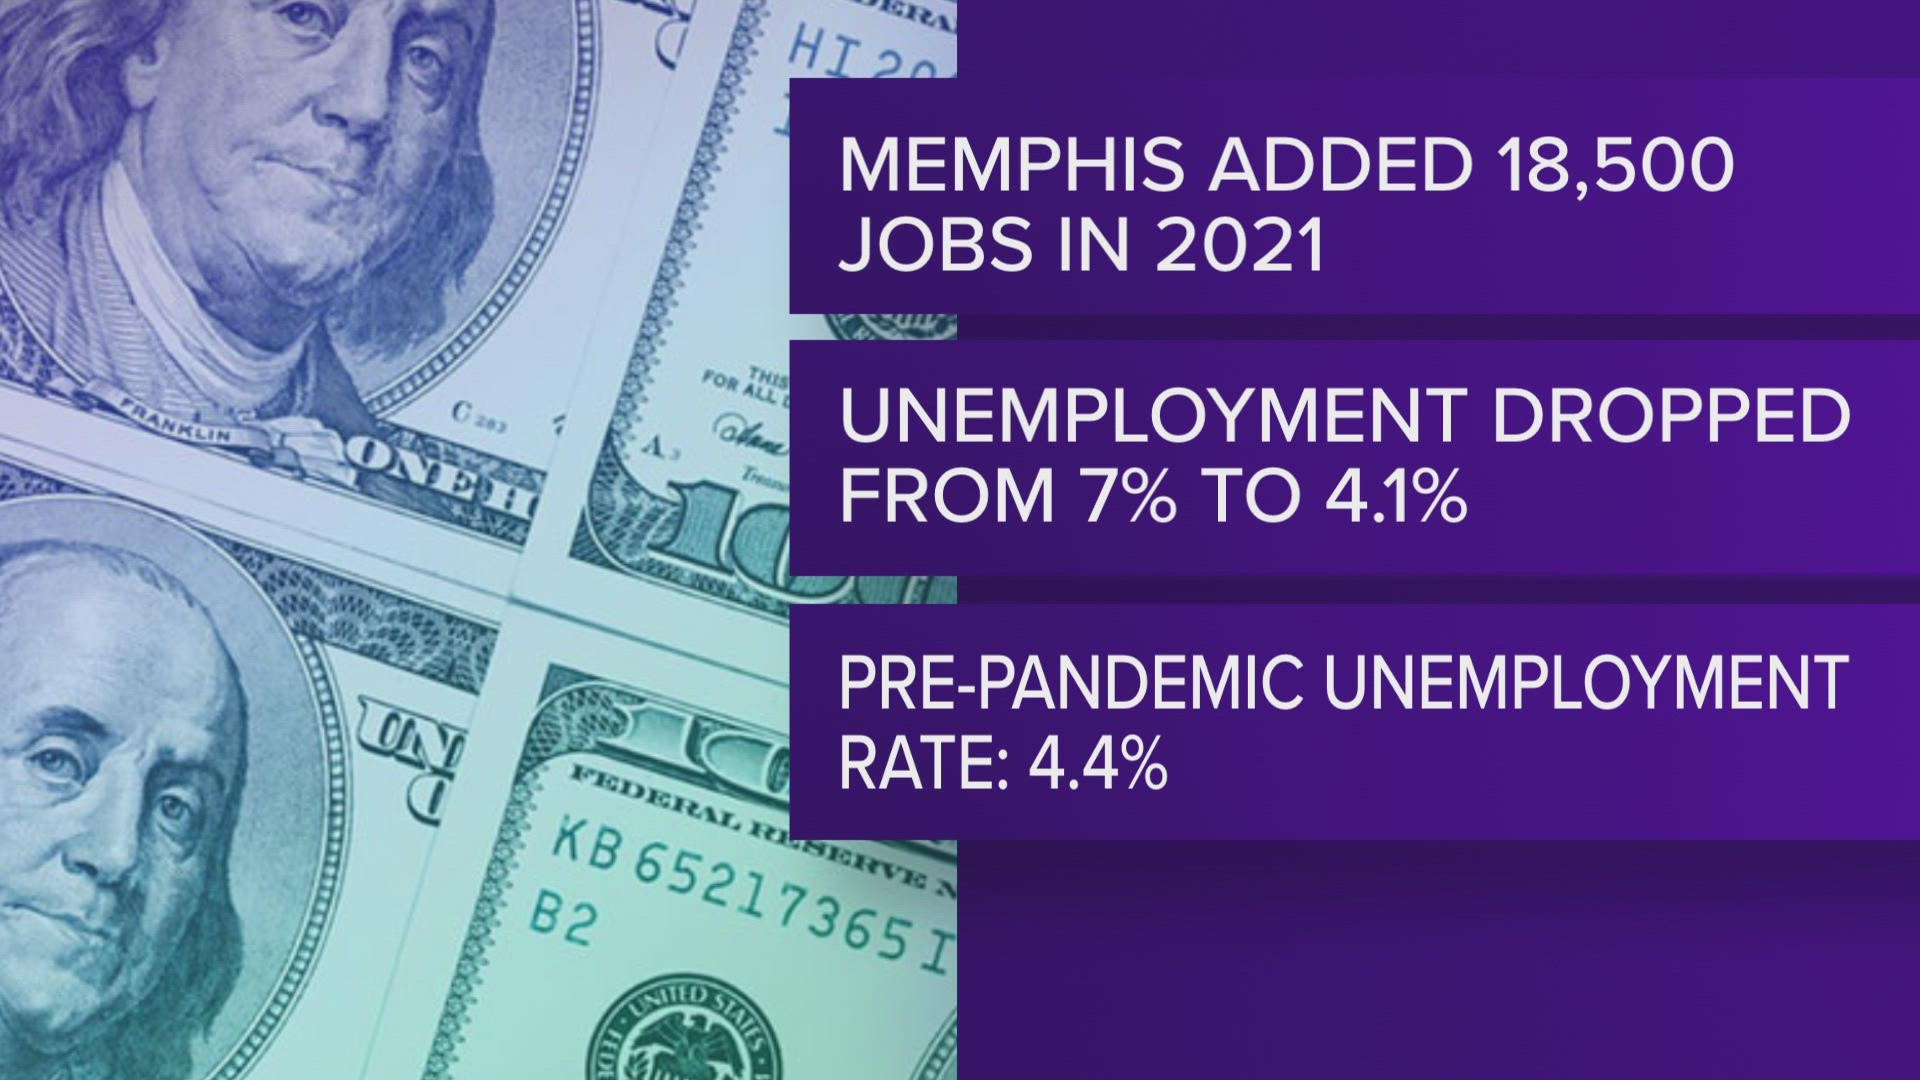 The new report says the economy in the Memphis area grew at a faster pace than the U.S. economy last year.